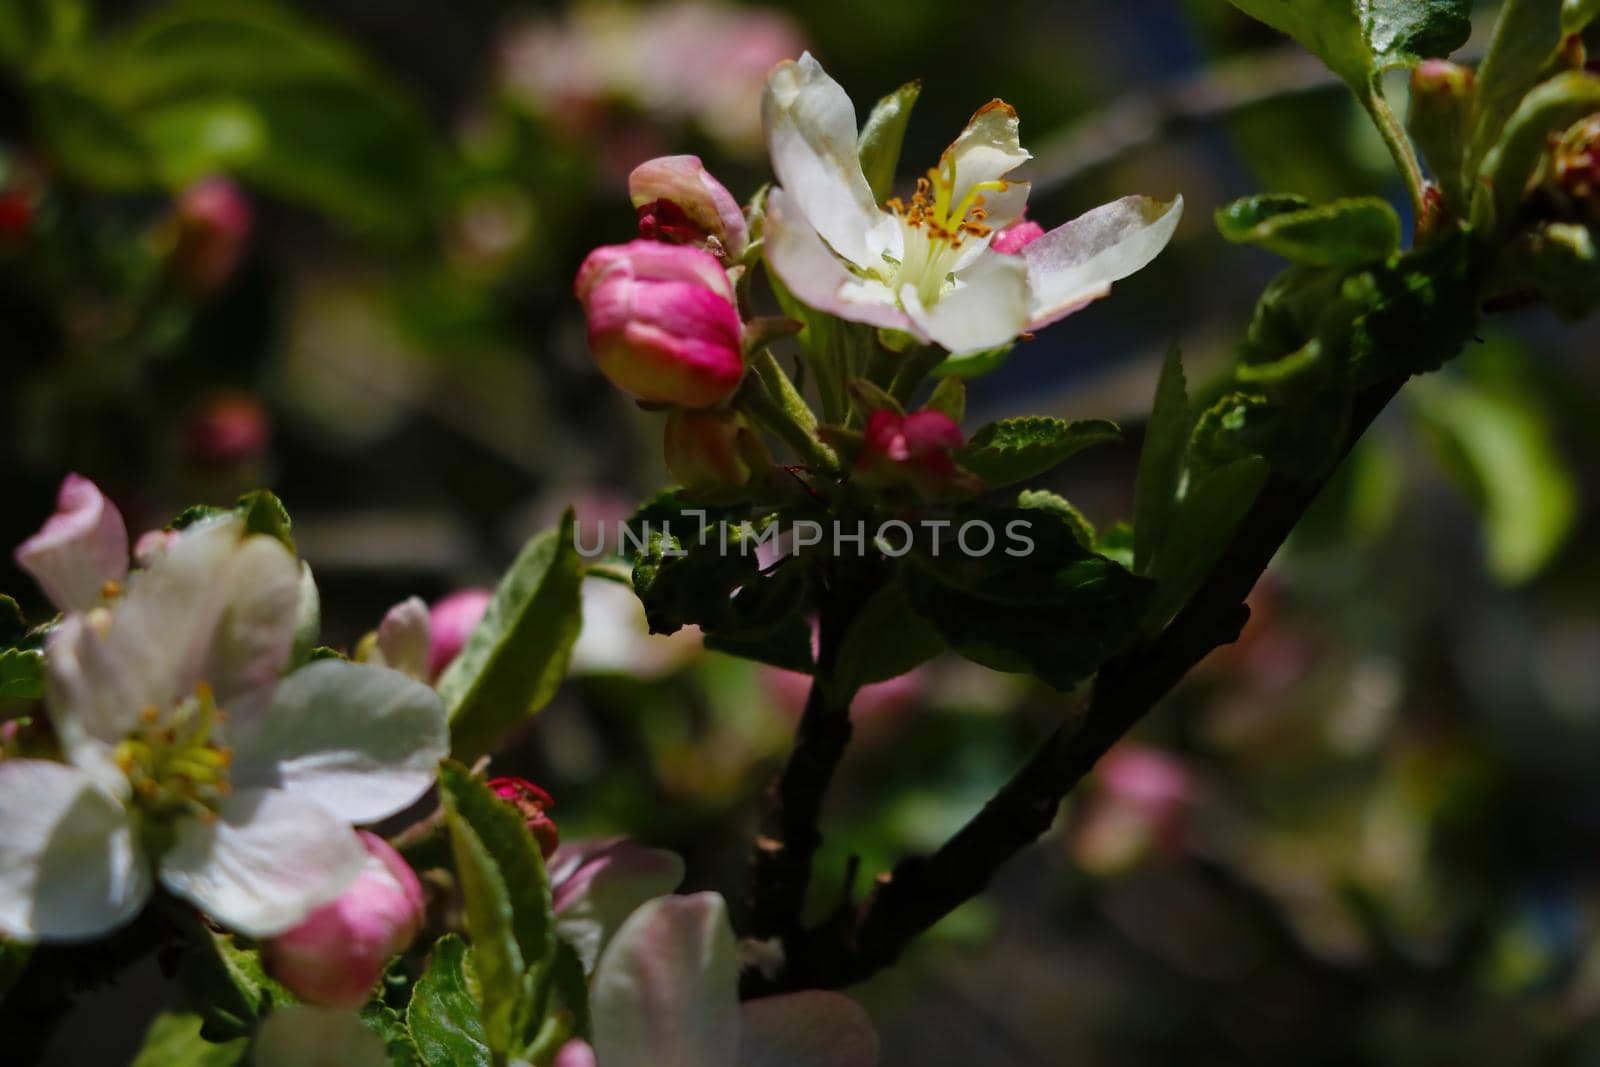 A branch of a blossoming apple tree in the spring garden